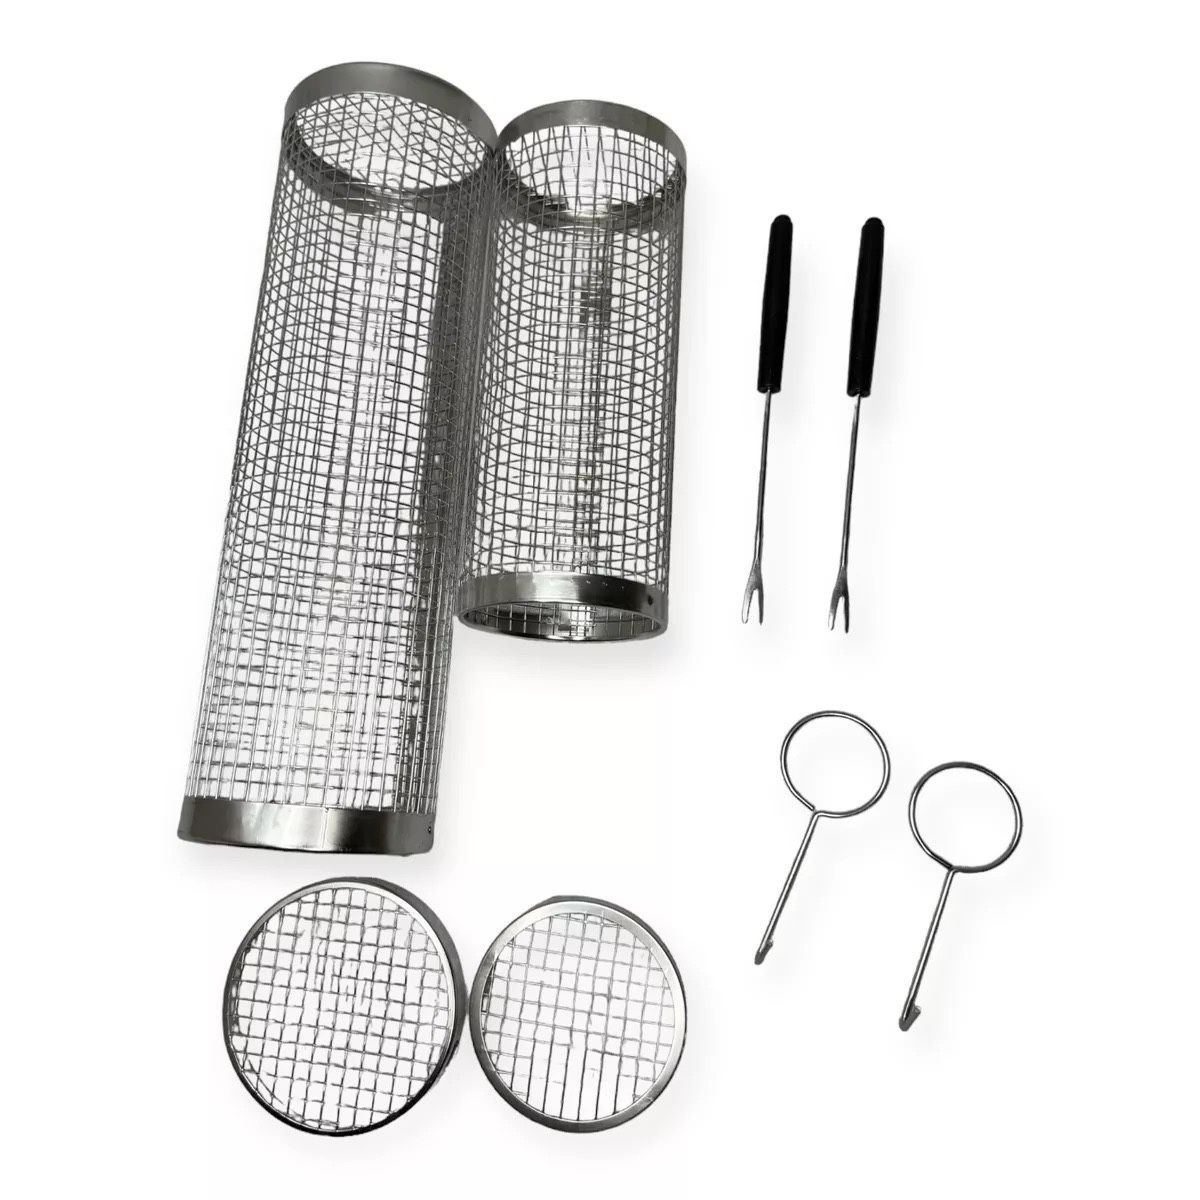 2 Piece Stainless Steel Grill Grate